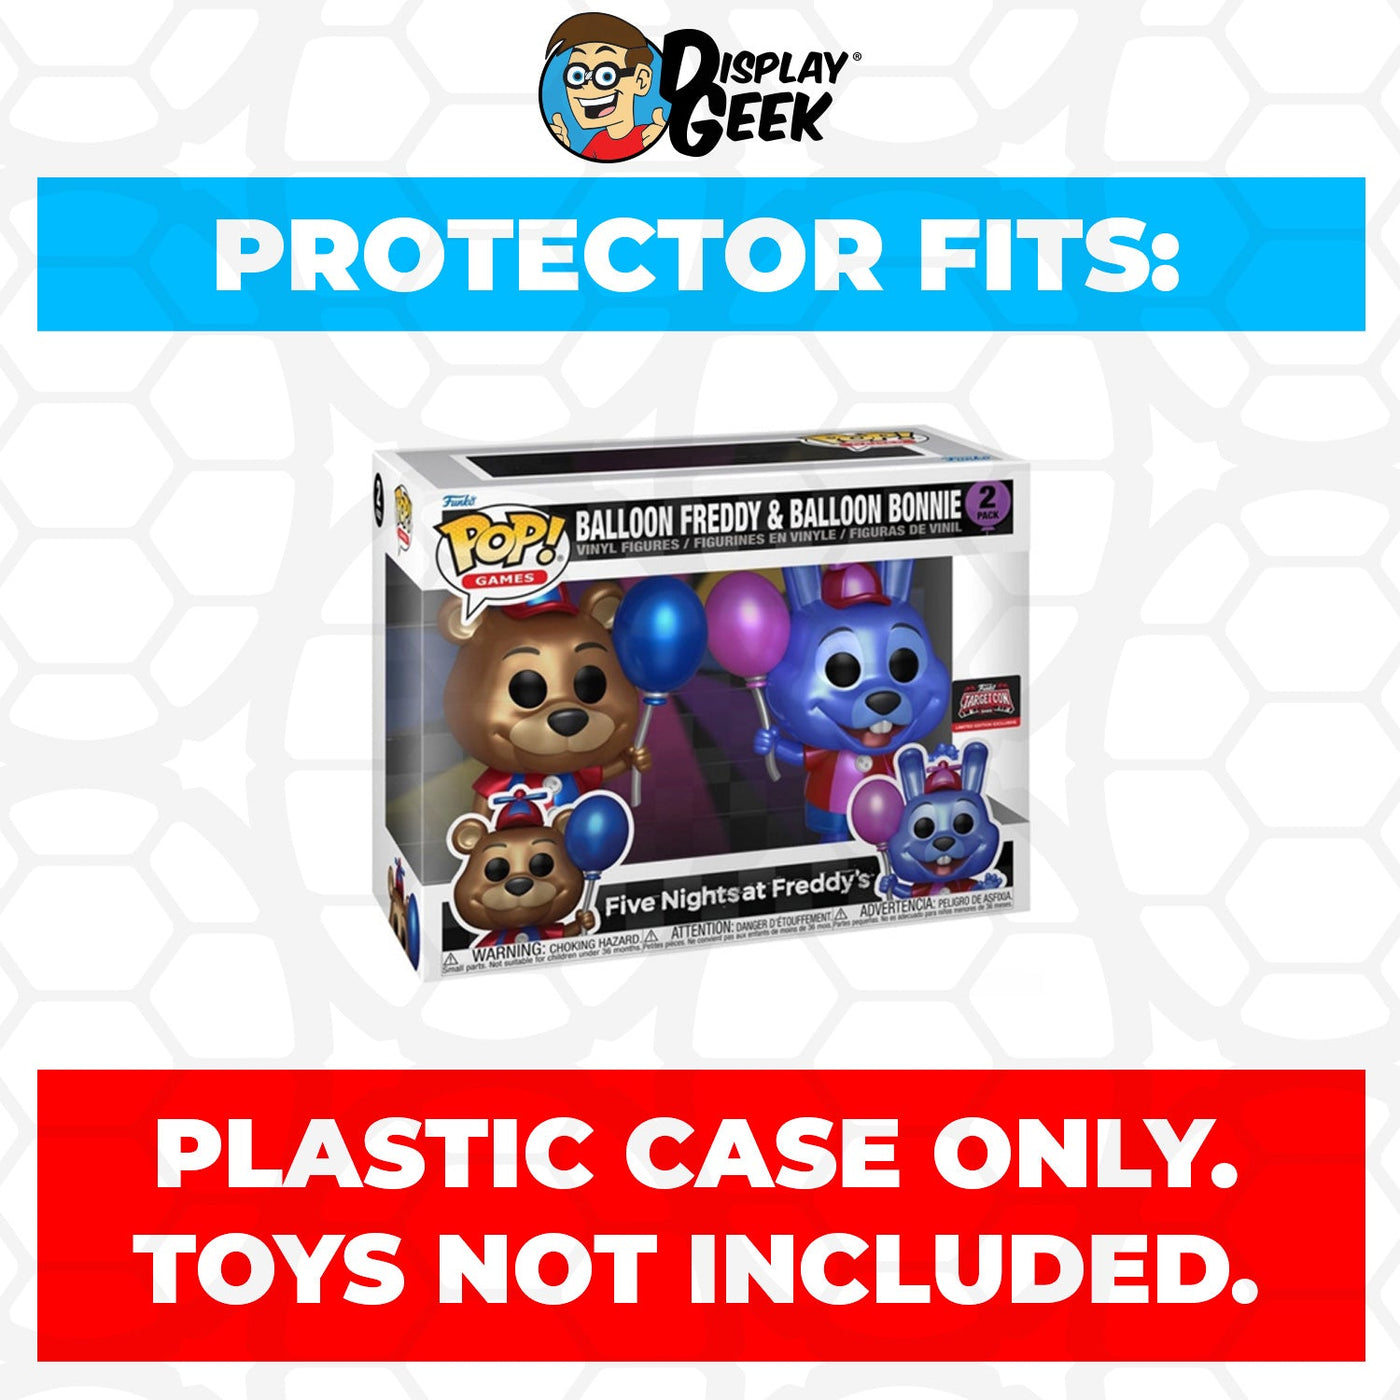 Funko POP! 2 Pack Five Nights at Freddys Balloon Freddy & Balloon Bonnie Metallic Pop Protector Size CONFIRMED!